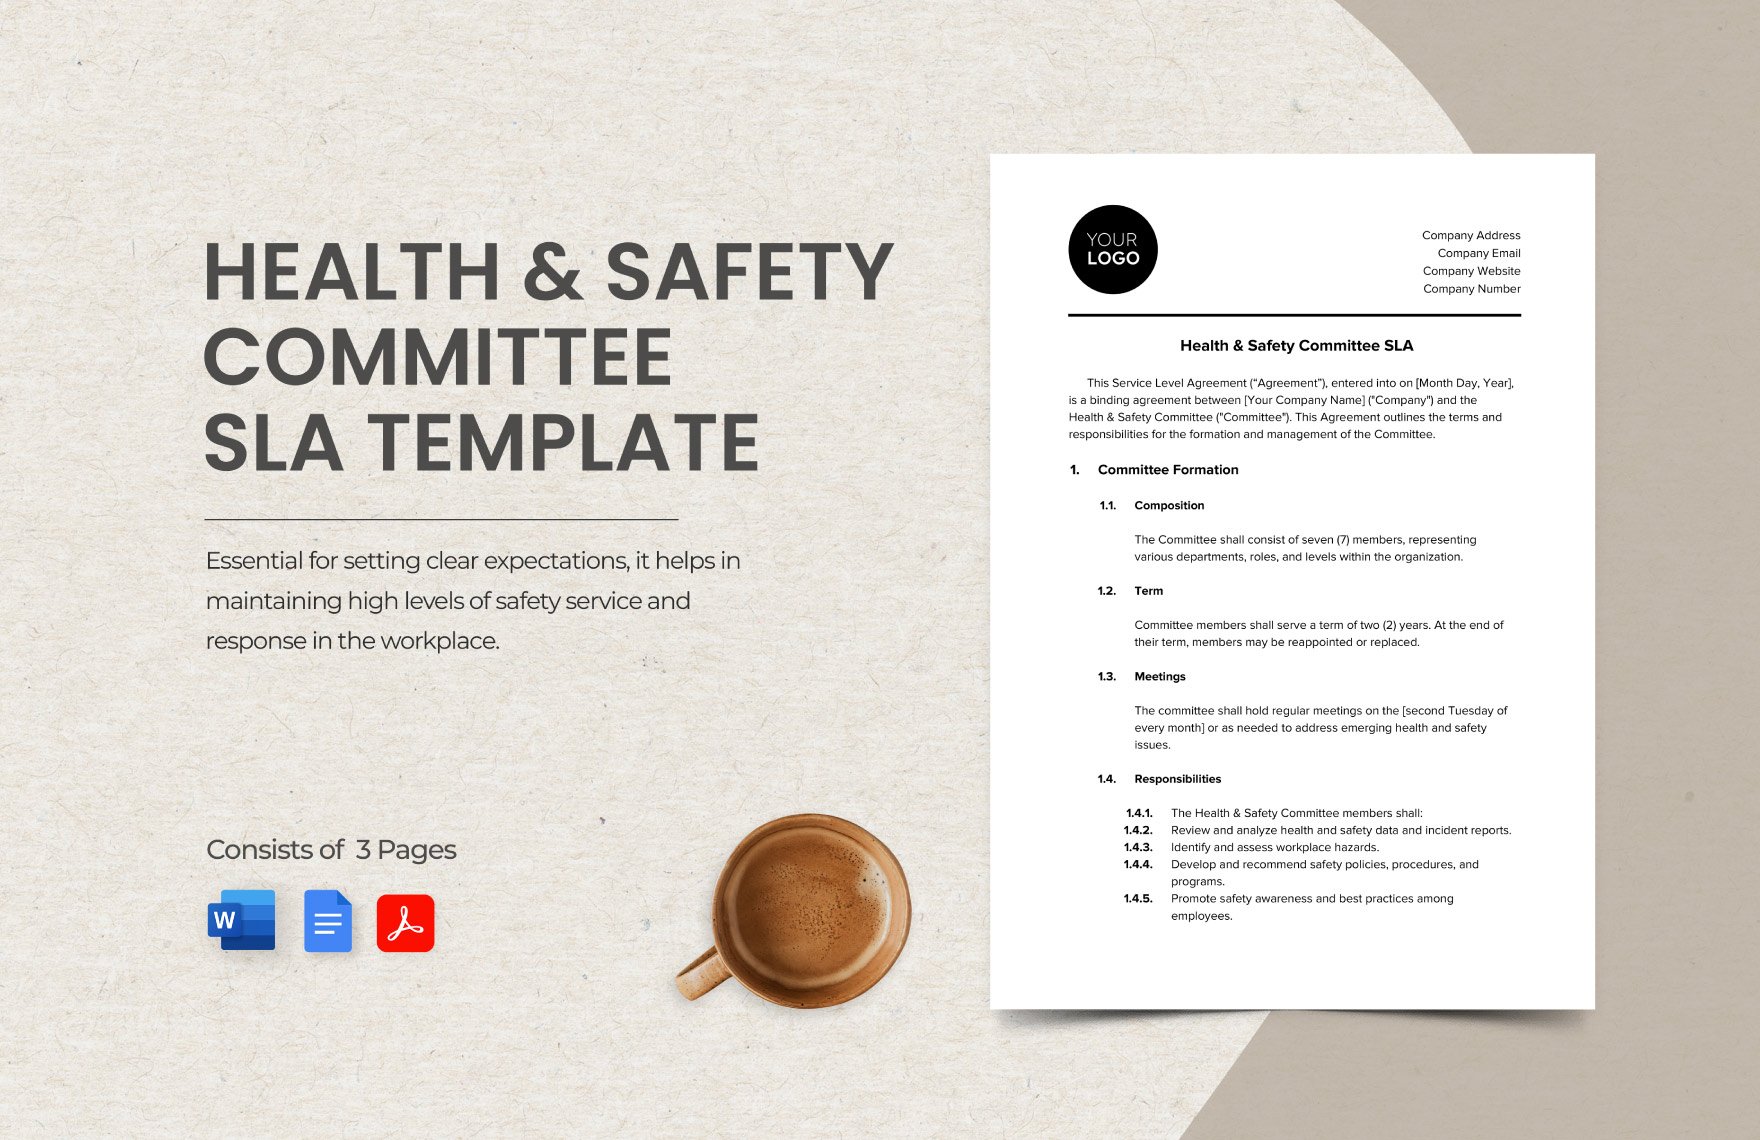 Health & Safety Committee SLA Template